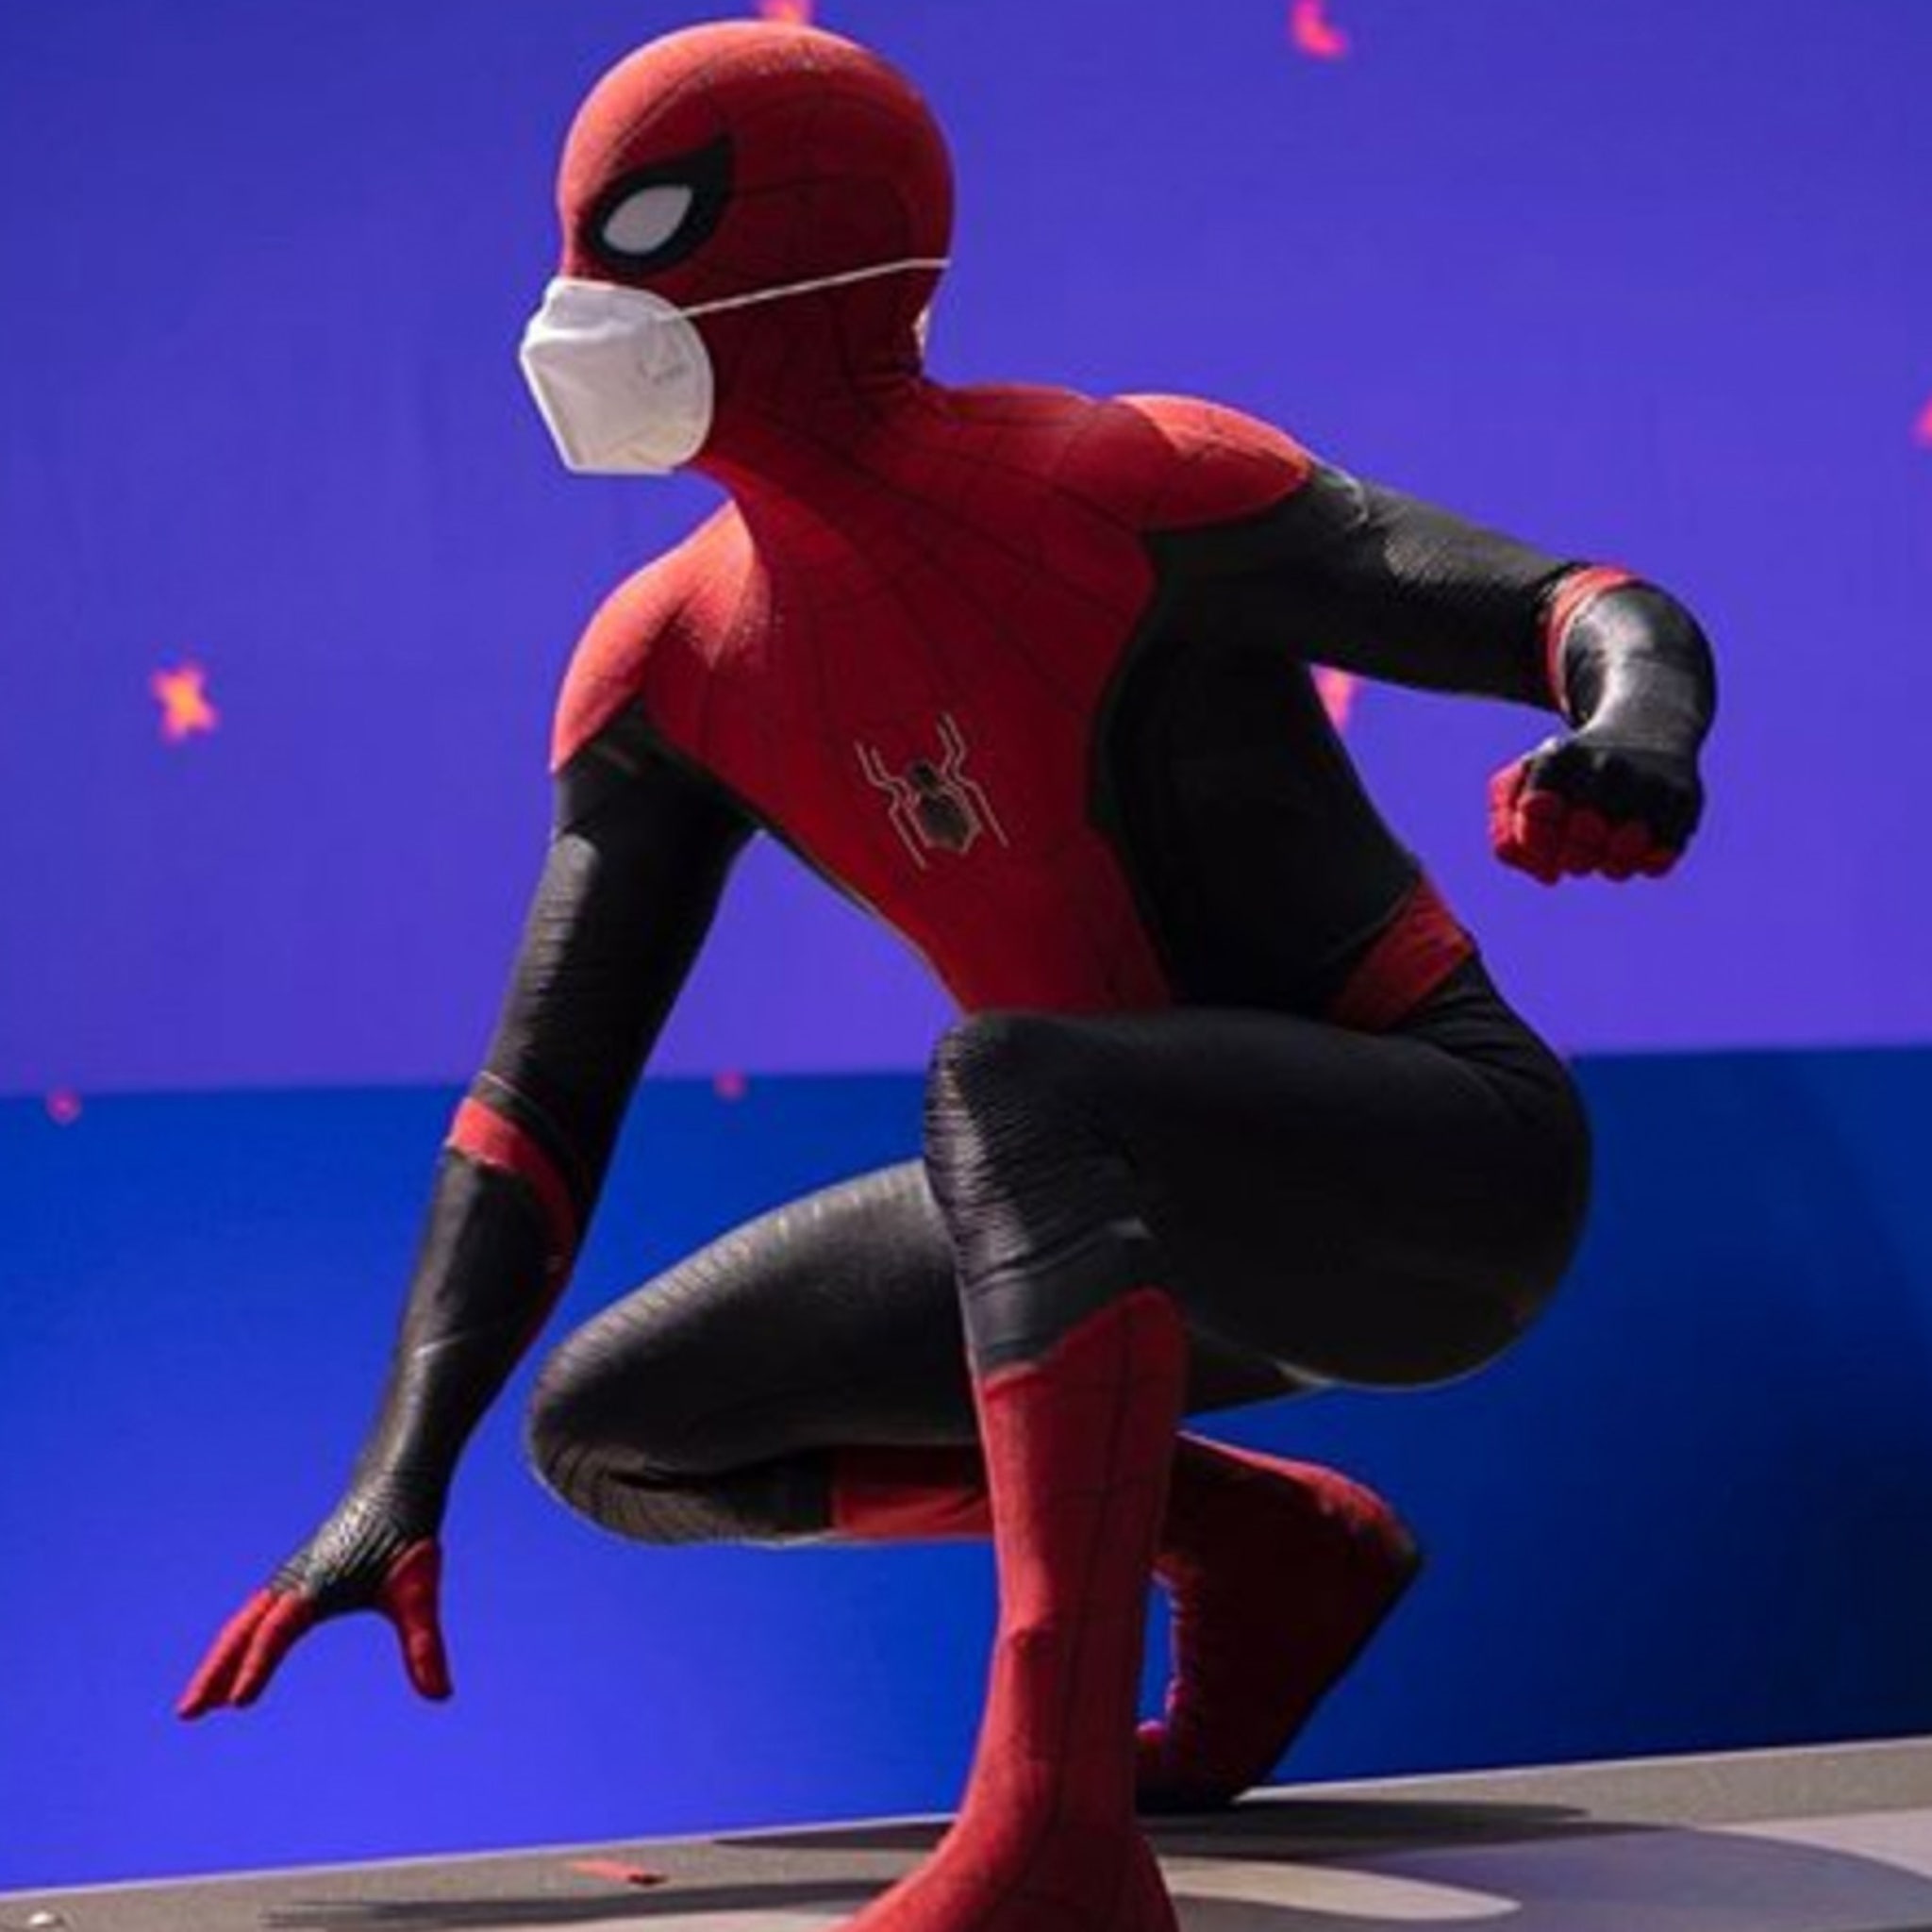 Tom Holland Promotes Wearing Masks with New Spider-Man Pic